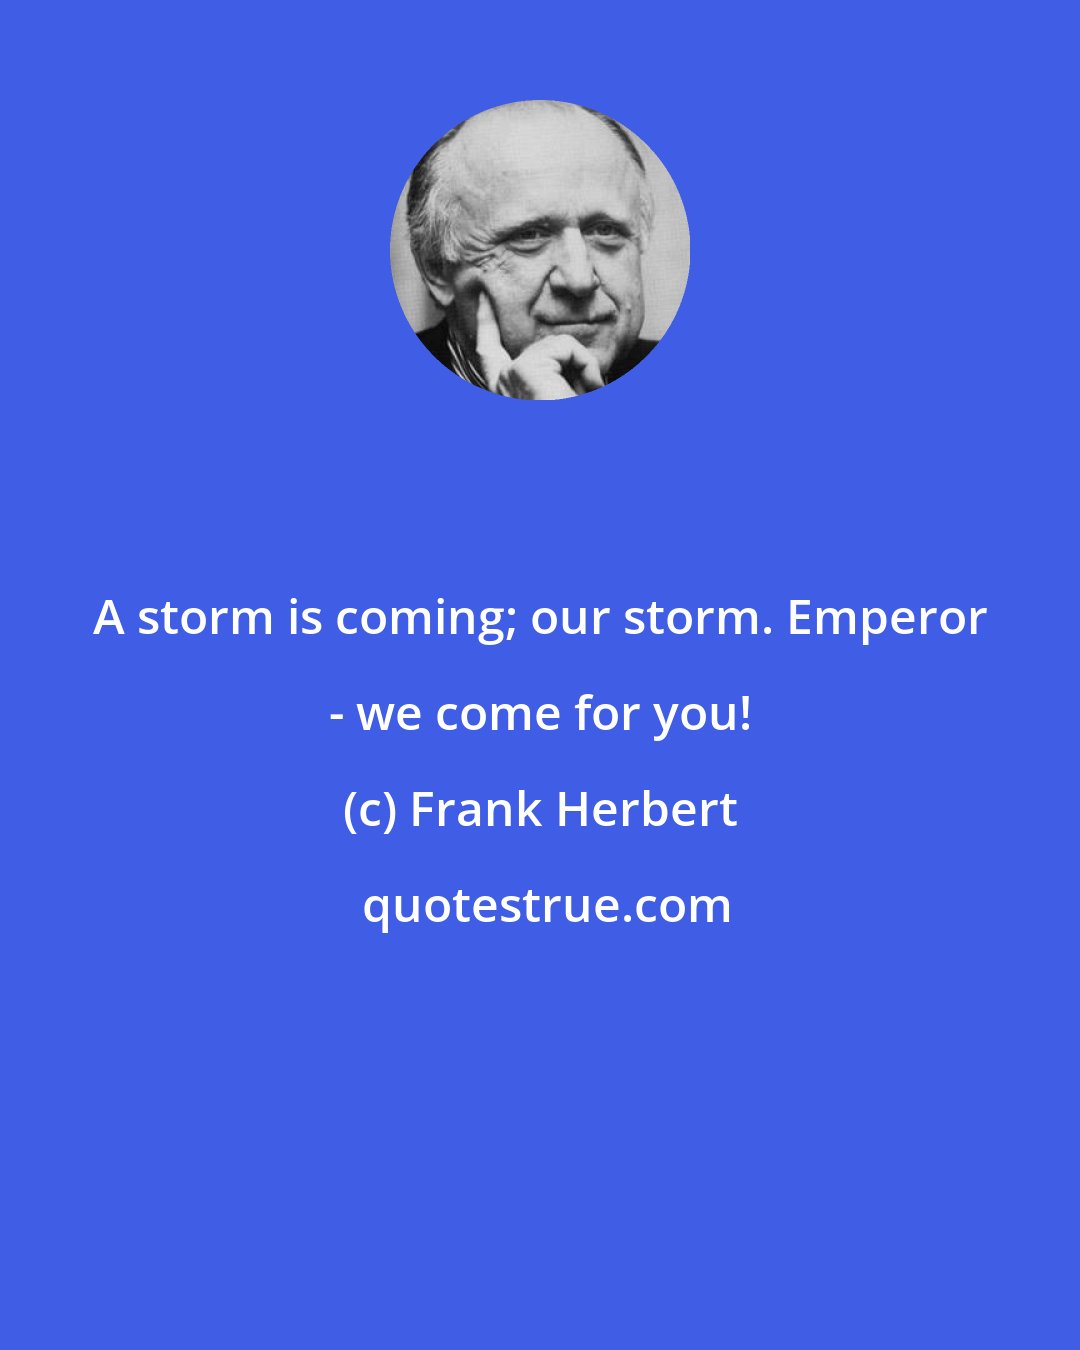 Frank Herbert: A storm is coming; our storm. Emperor - we come for you!